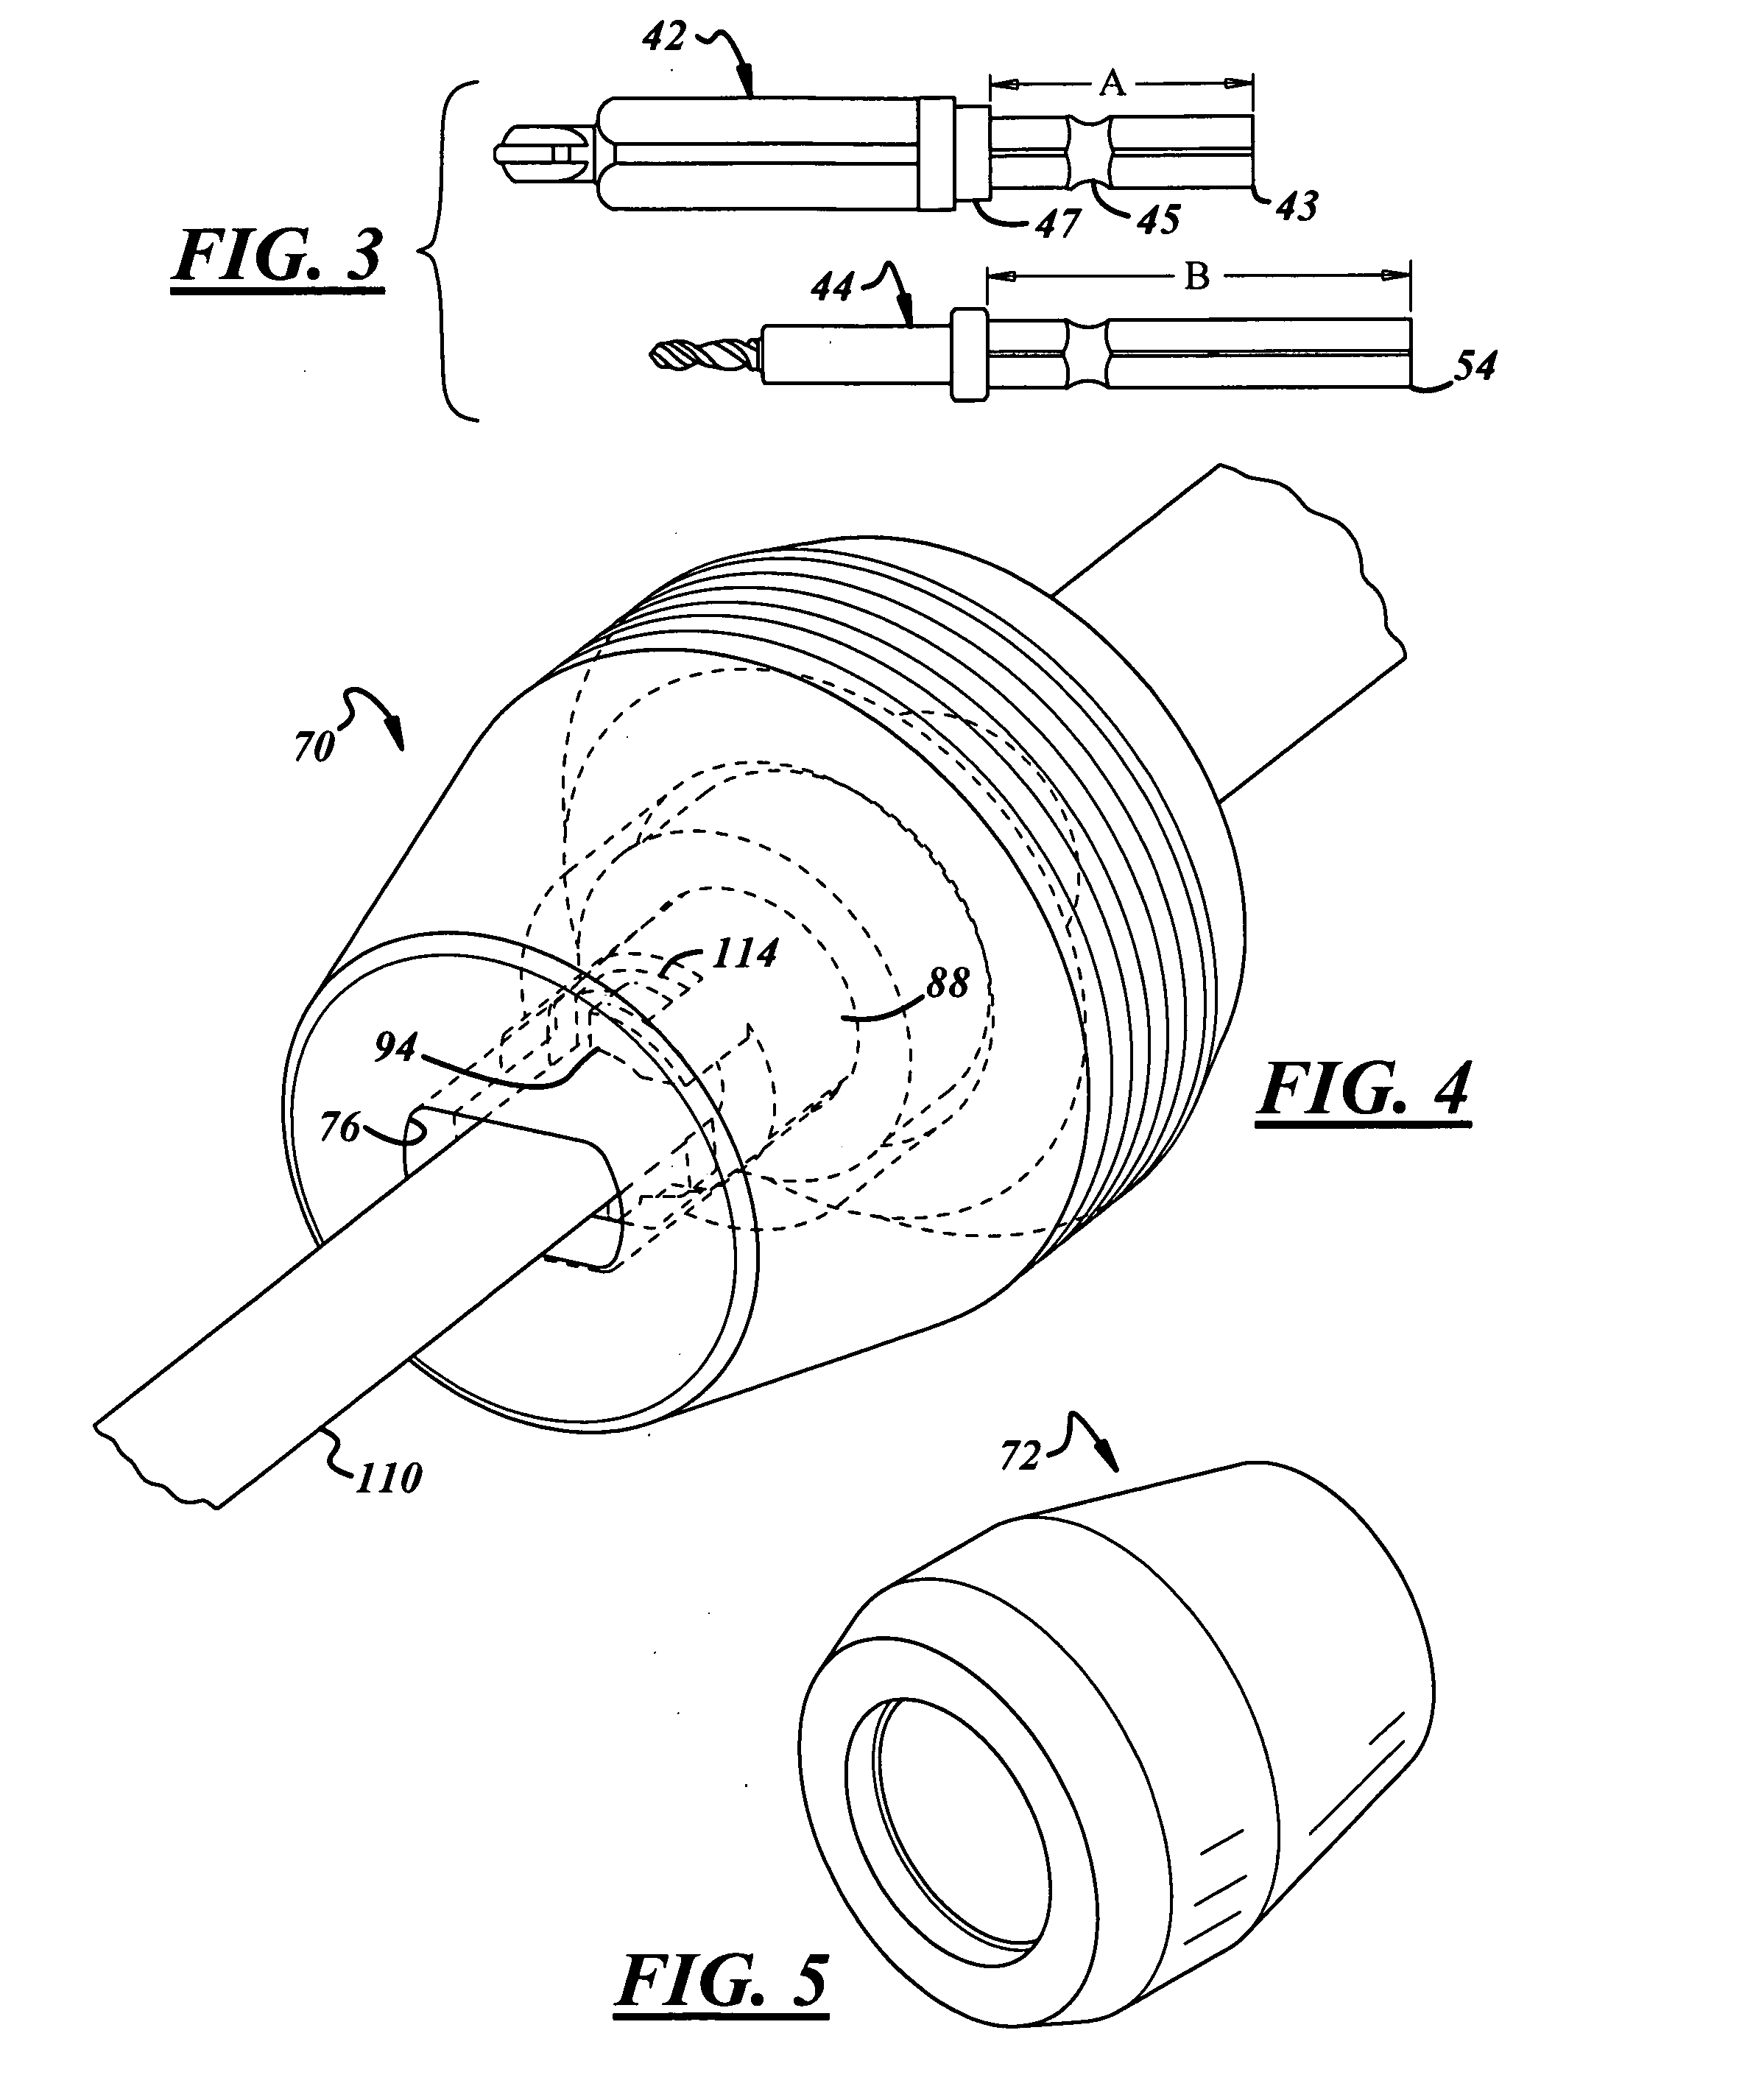 Surgical device with smart bit recognition collet assembly to set a desired application mode